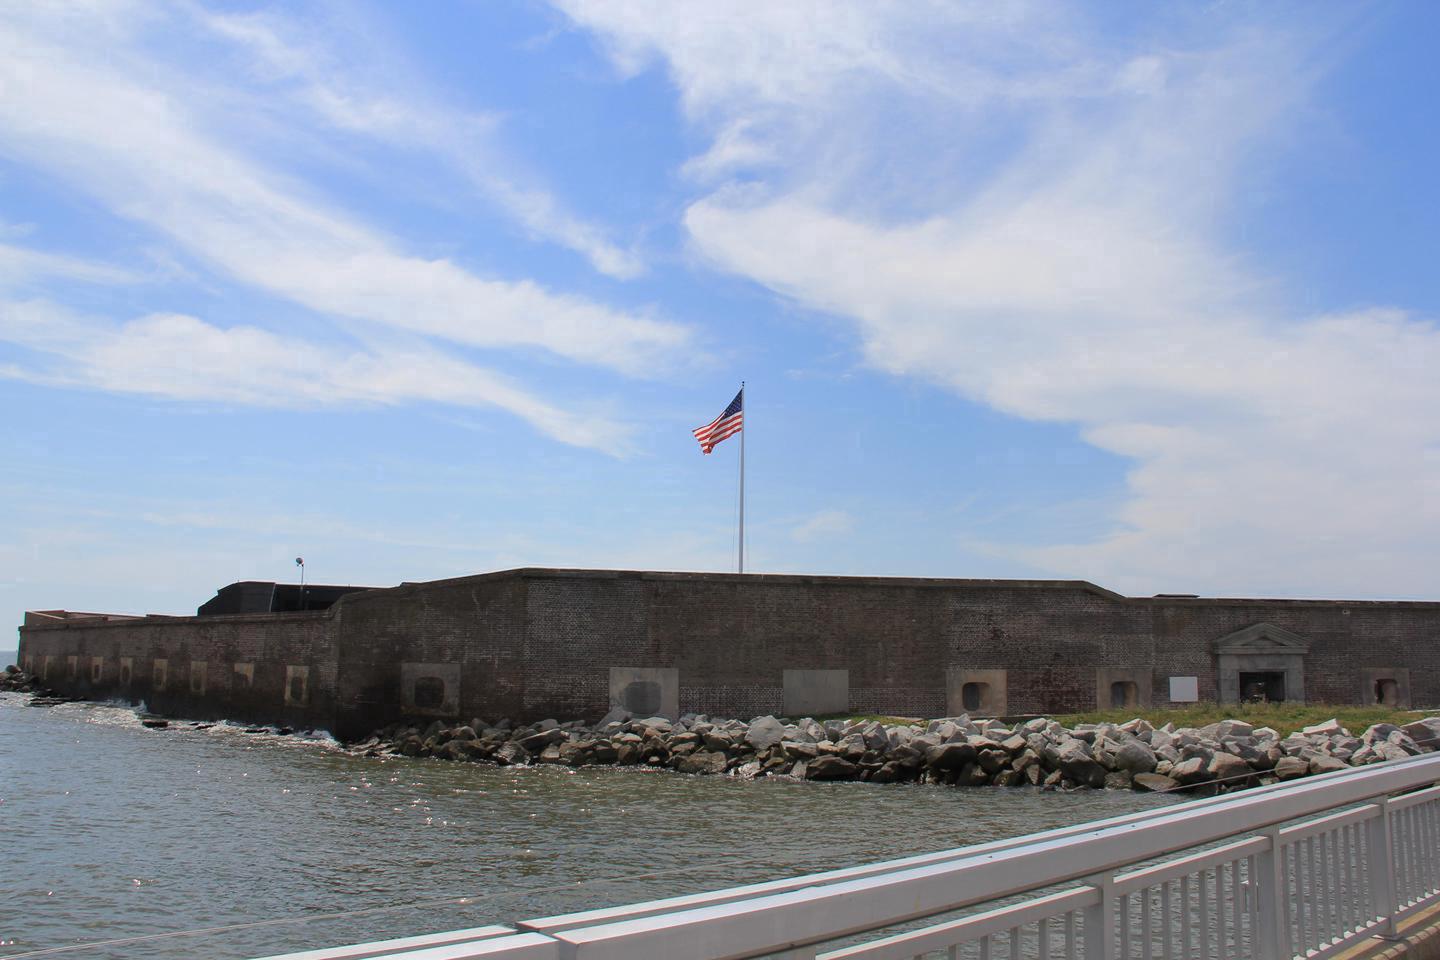 Fort SumterFort Sumter is located on an island in Charleston Harbor and is only accessible by boat.